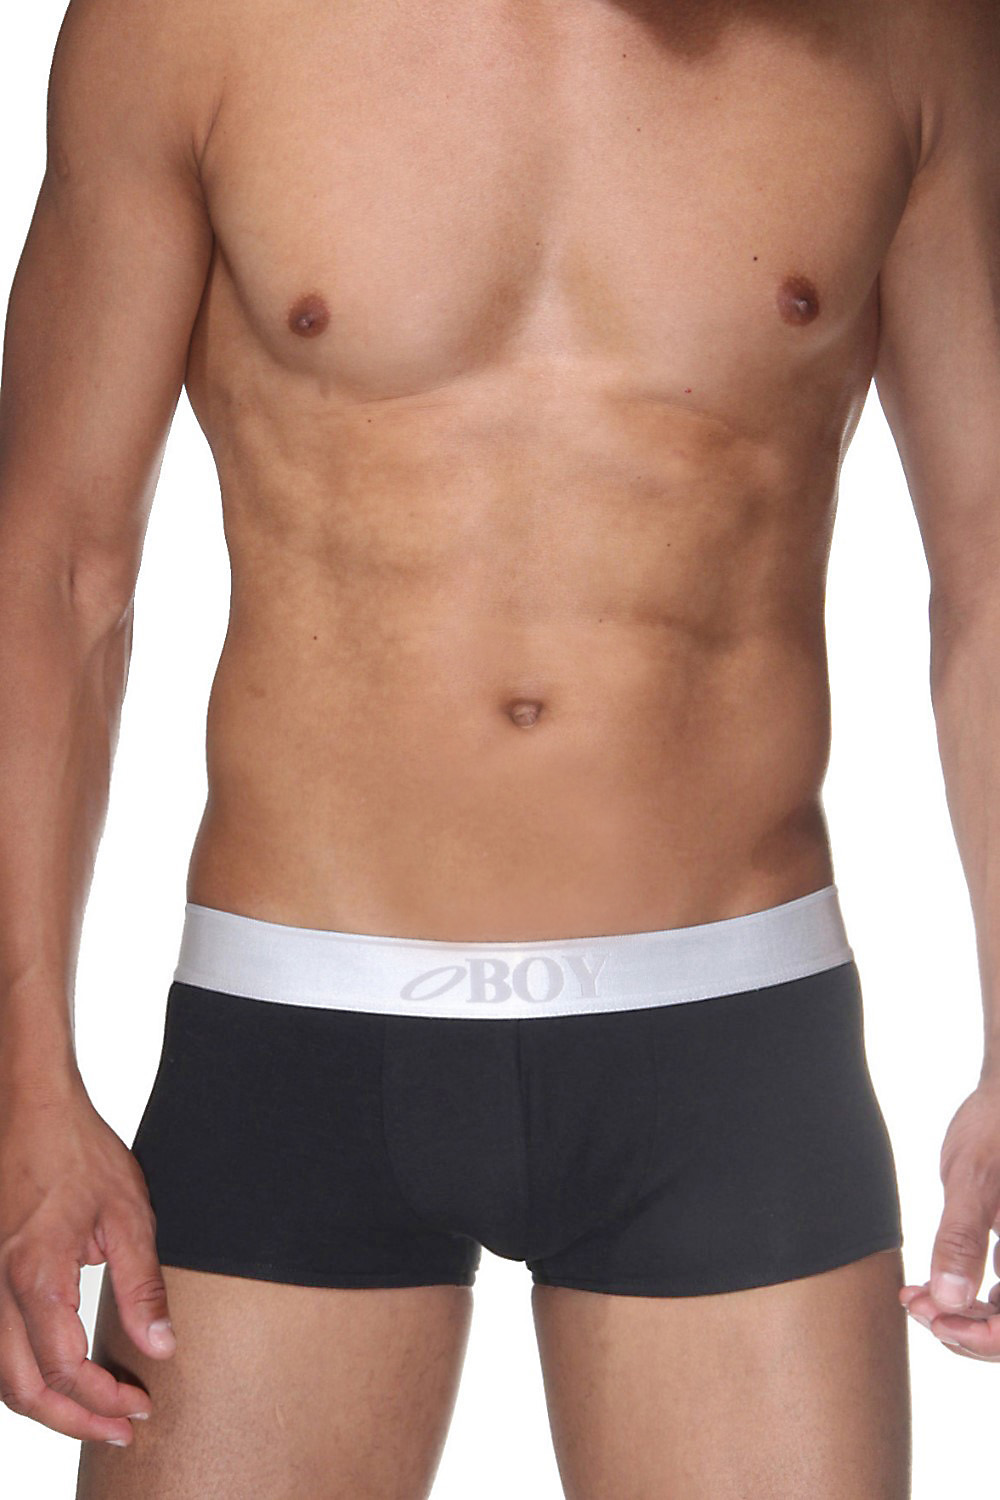 OBOY SILVER trunks at oboy.com